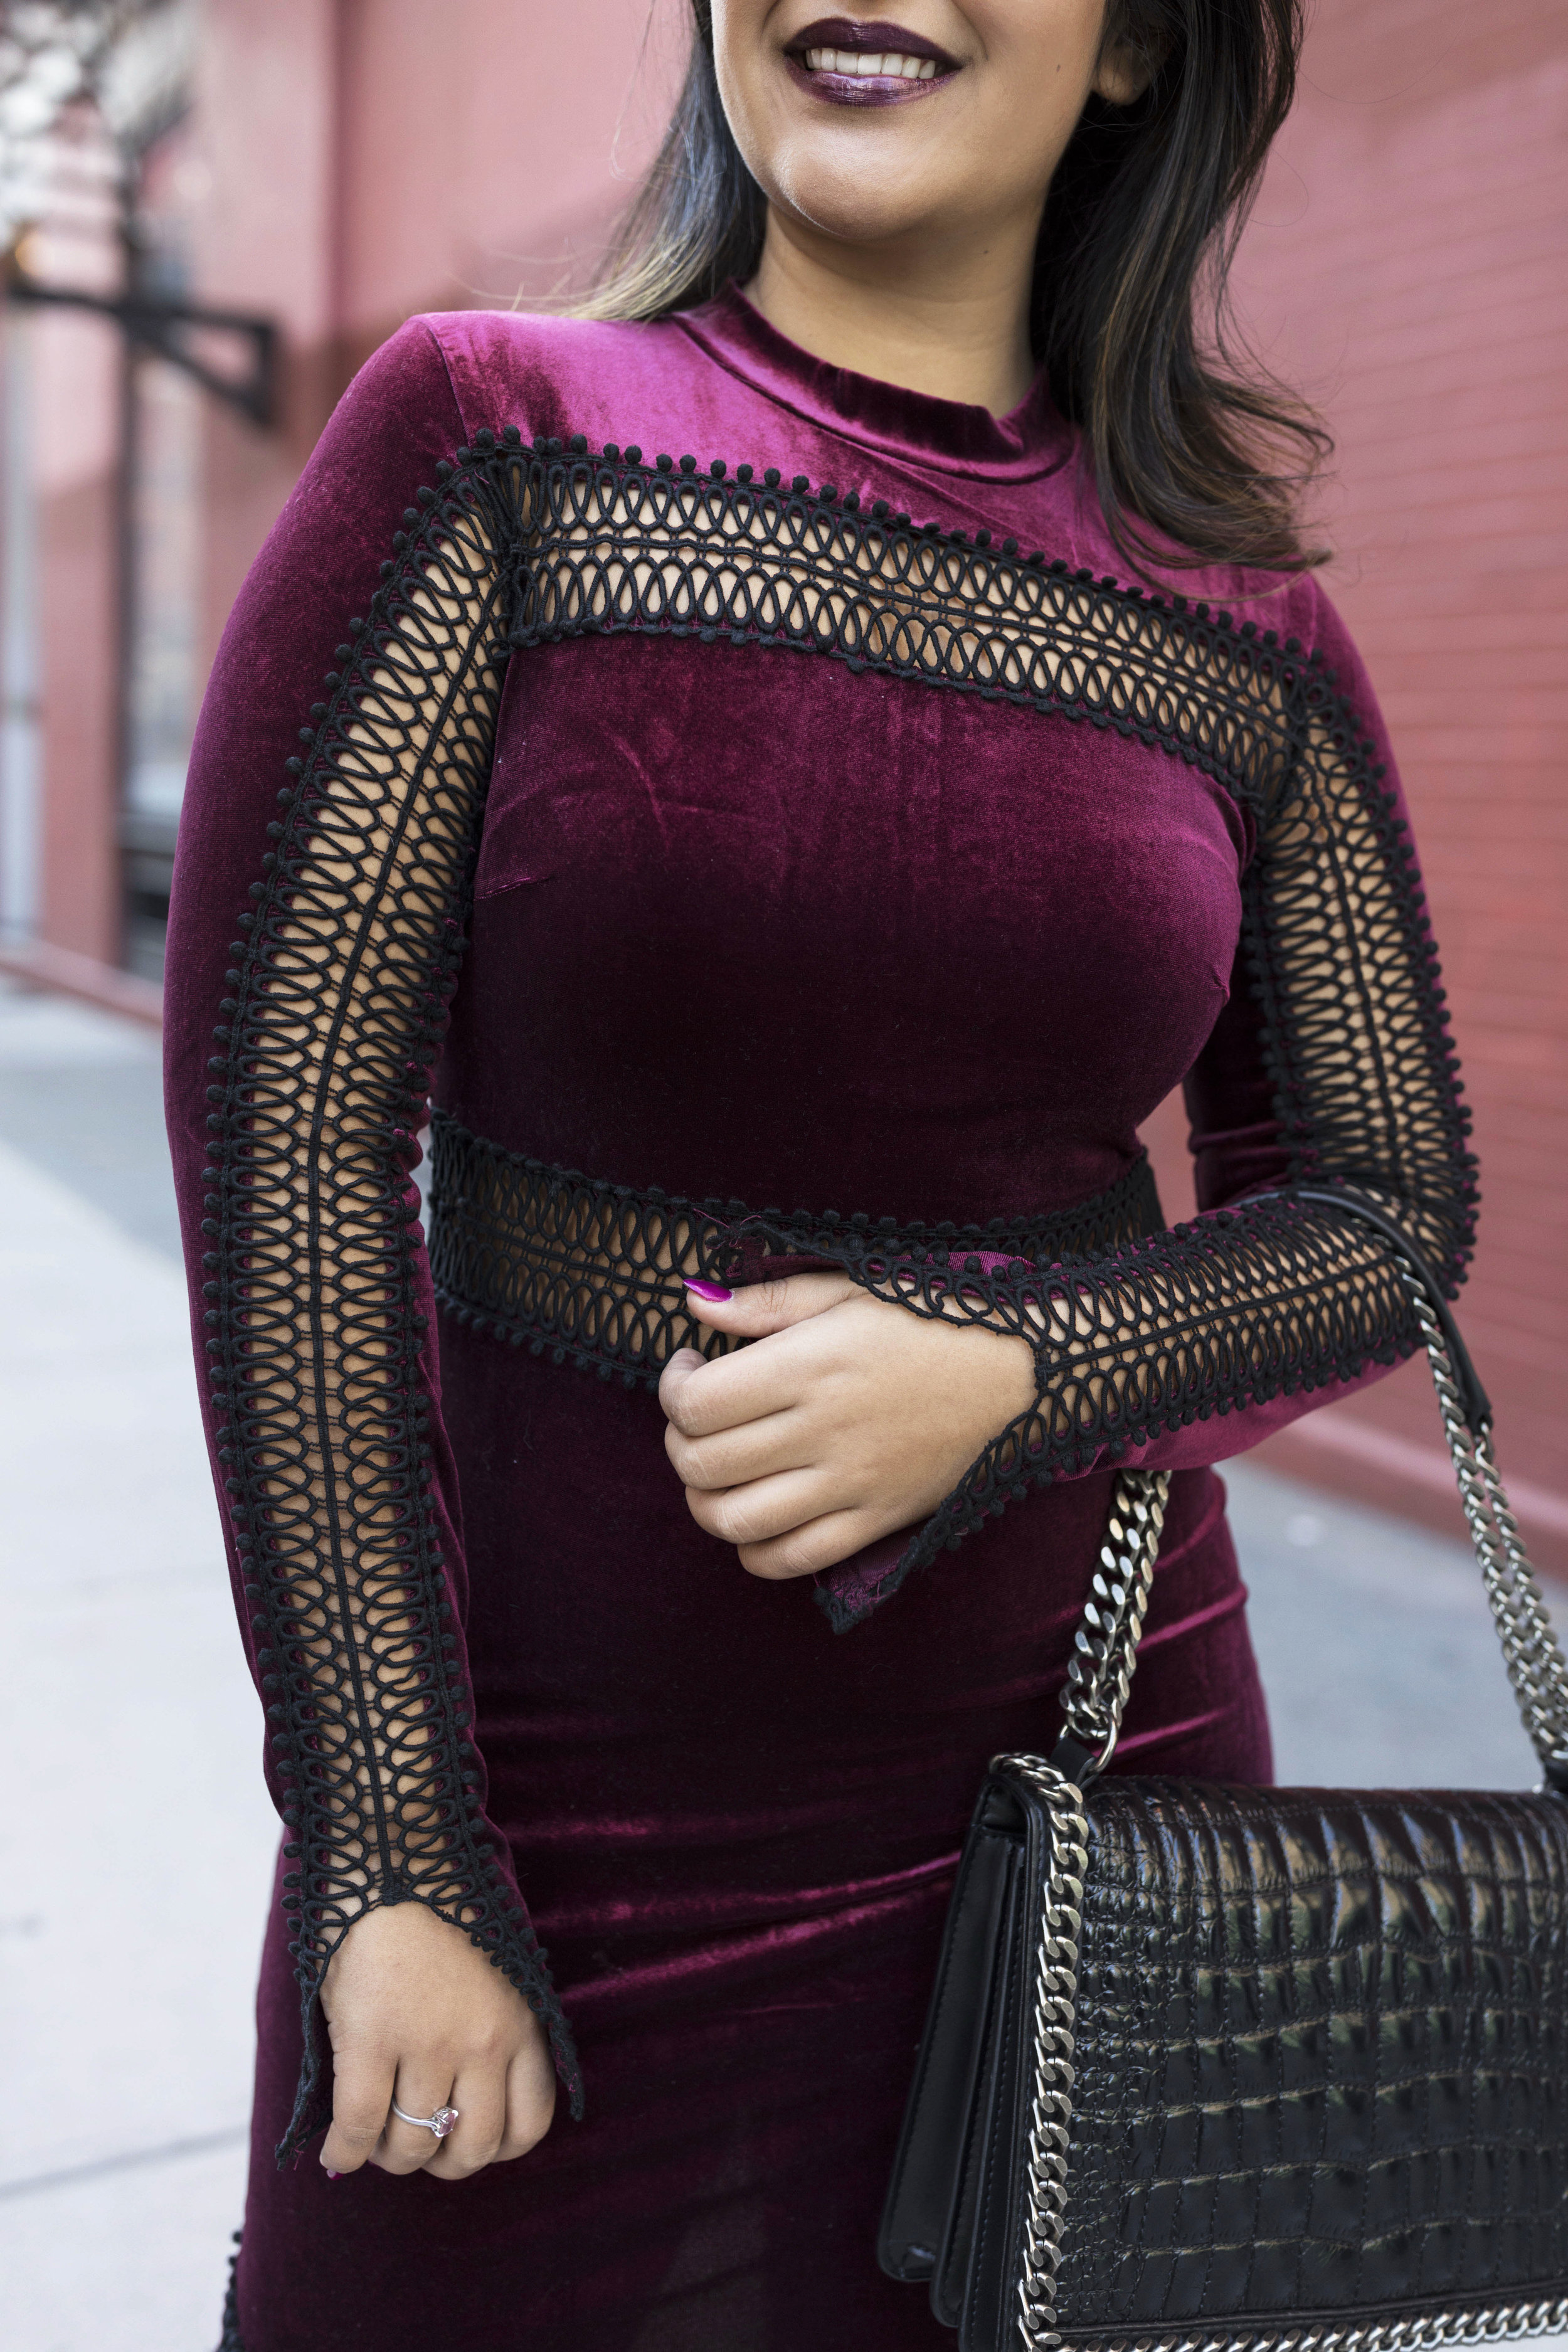 Krity S x Holiday Outfit x Century 21 Burgundy Velvet Dress and Faux Fur11.jpg